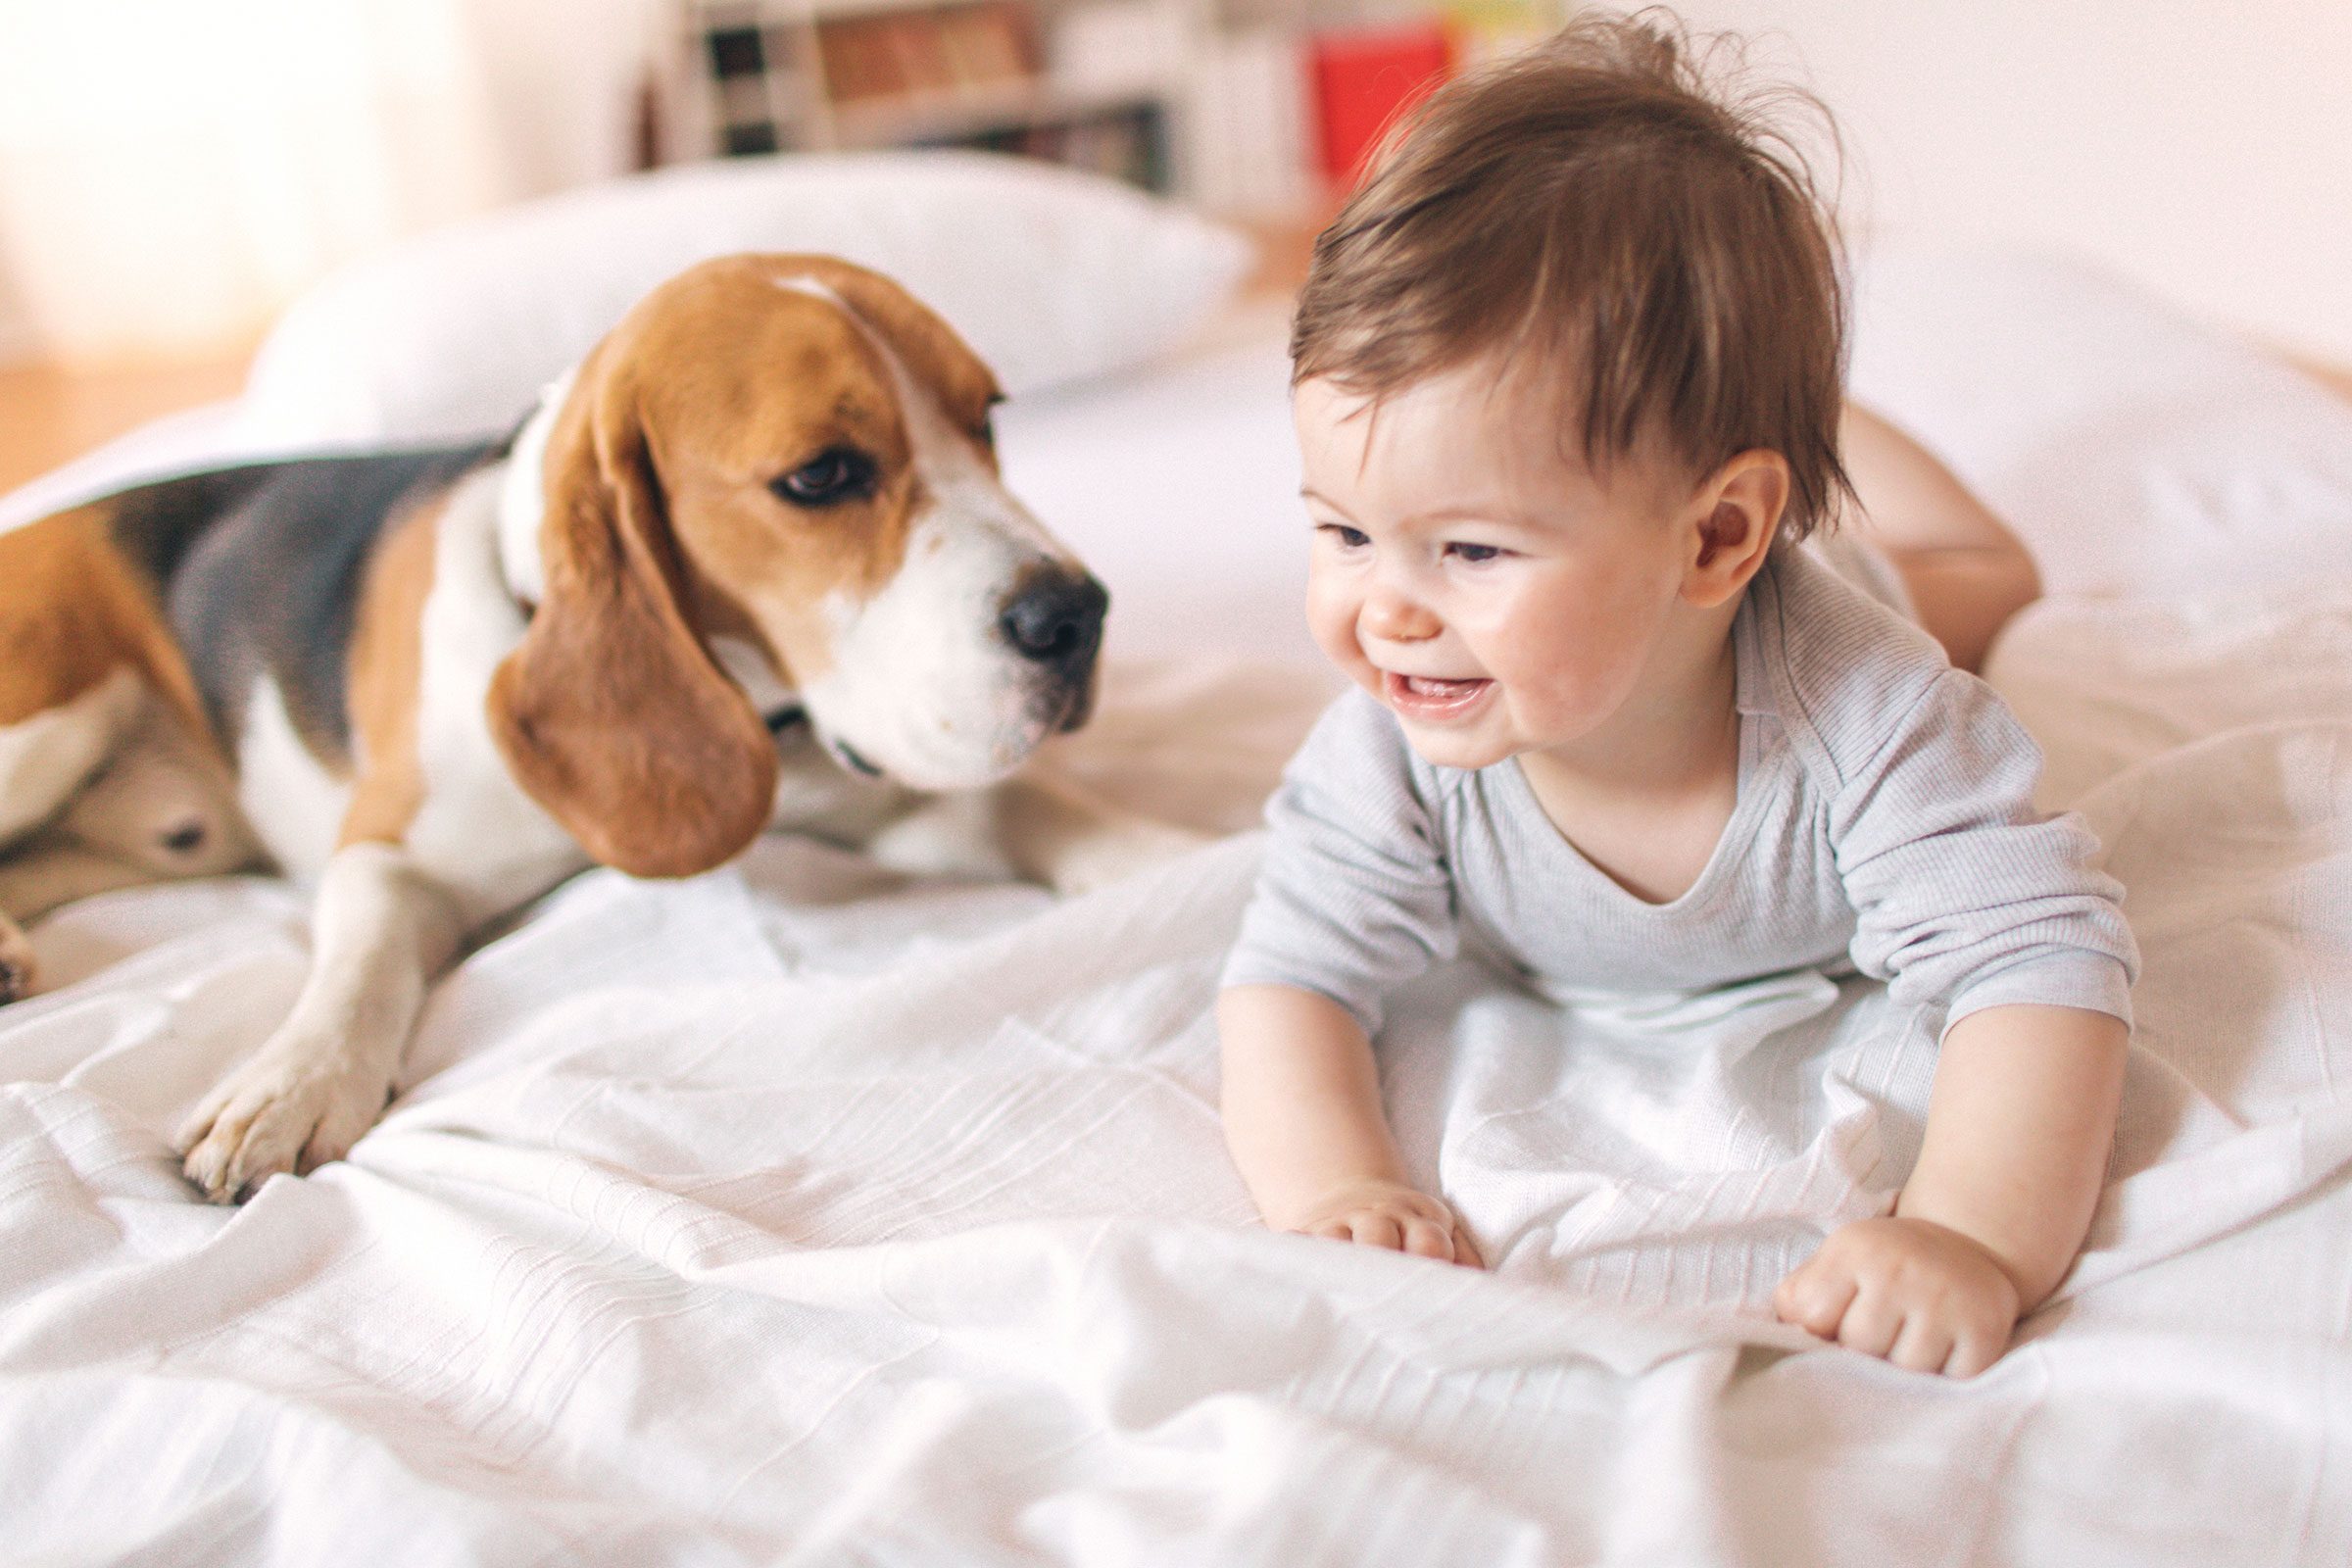 <p class="listicle-para">Babies with pets in the house are less likely to develop allergies later in life, according to a study in <em>Clinical & Experimental Allergy</em>. The study found that 18-year-olds who’d had a cat or dog in the family when they were less than a year old were about half as likely to be allergic to that animal as those who didn’t have an animal in the house. But early-life exposure is key—adopting a pet later as an adult won’t help your immune system in the same way. Here are <a href="https://www.rd.com/list/dog-superpowers/">11 more superpowers your dog has</a>.</p>